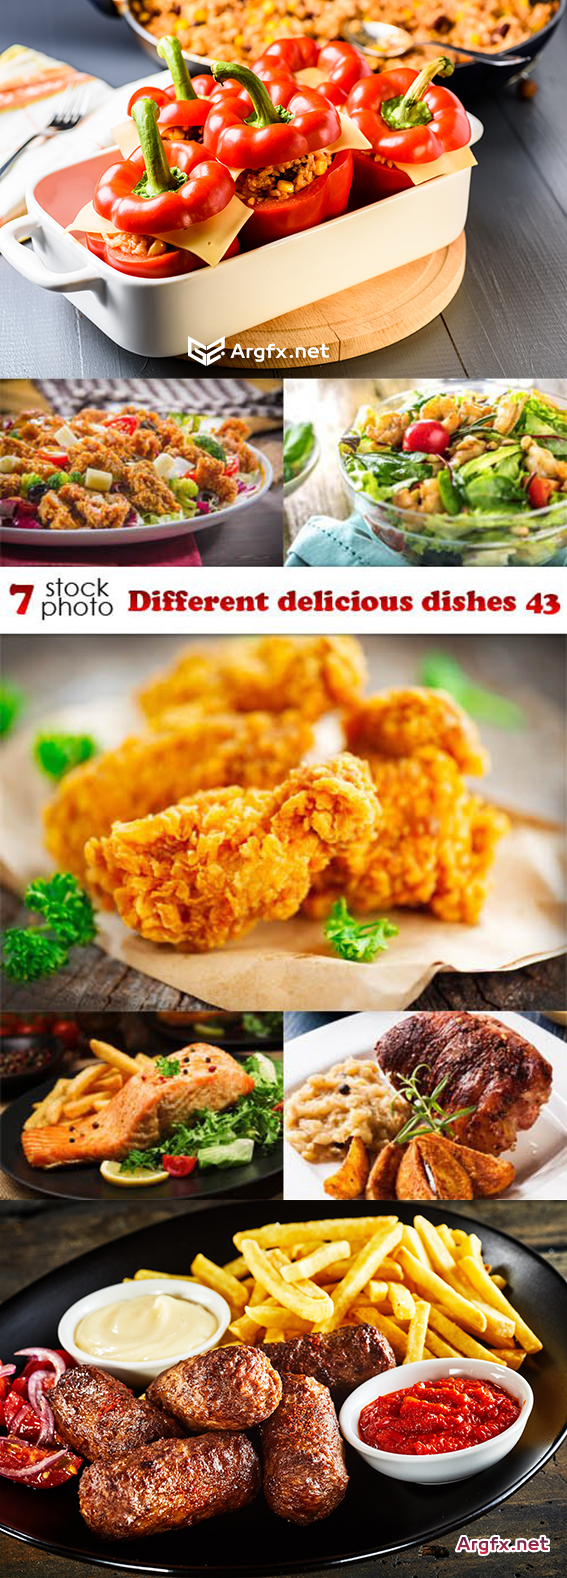 Photos - Different delicious dishes 43